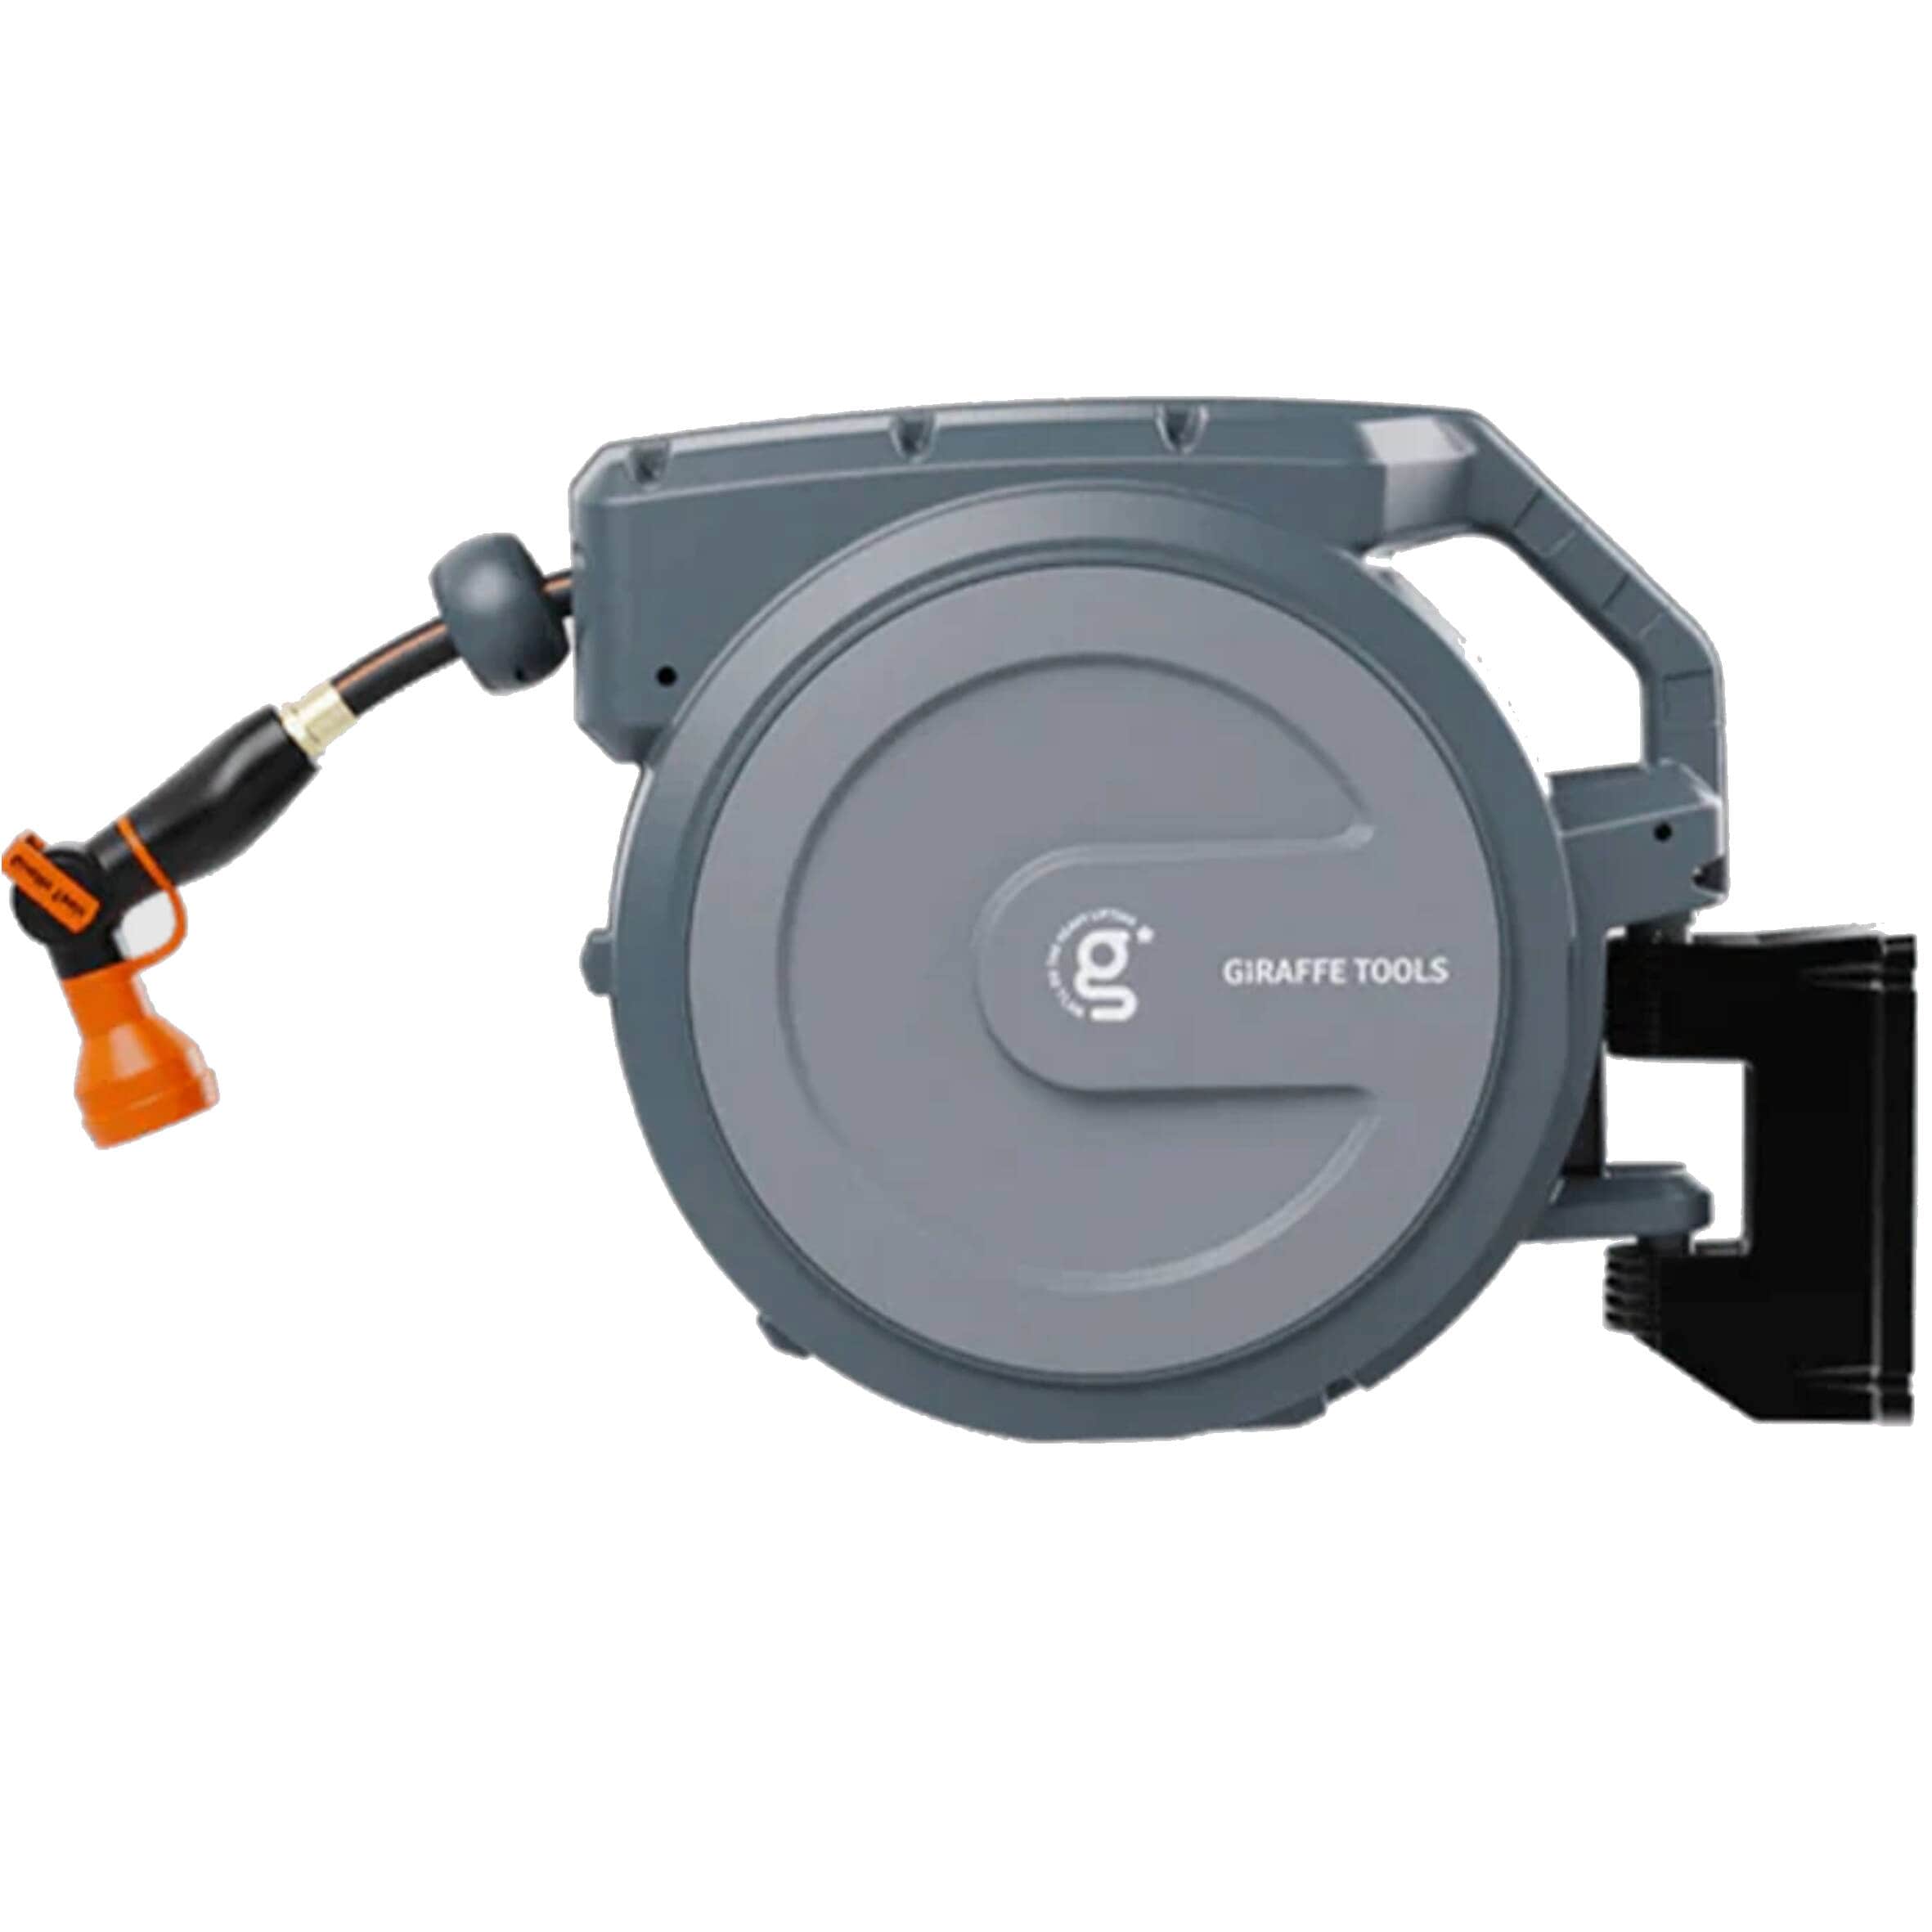 Giraffe Tools Plastic 90-ft Wall-Mount Hose Reel in Gray | AW4058US-MB